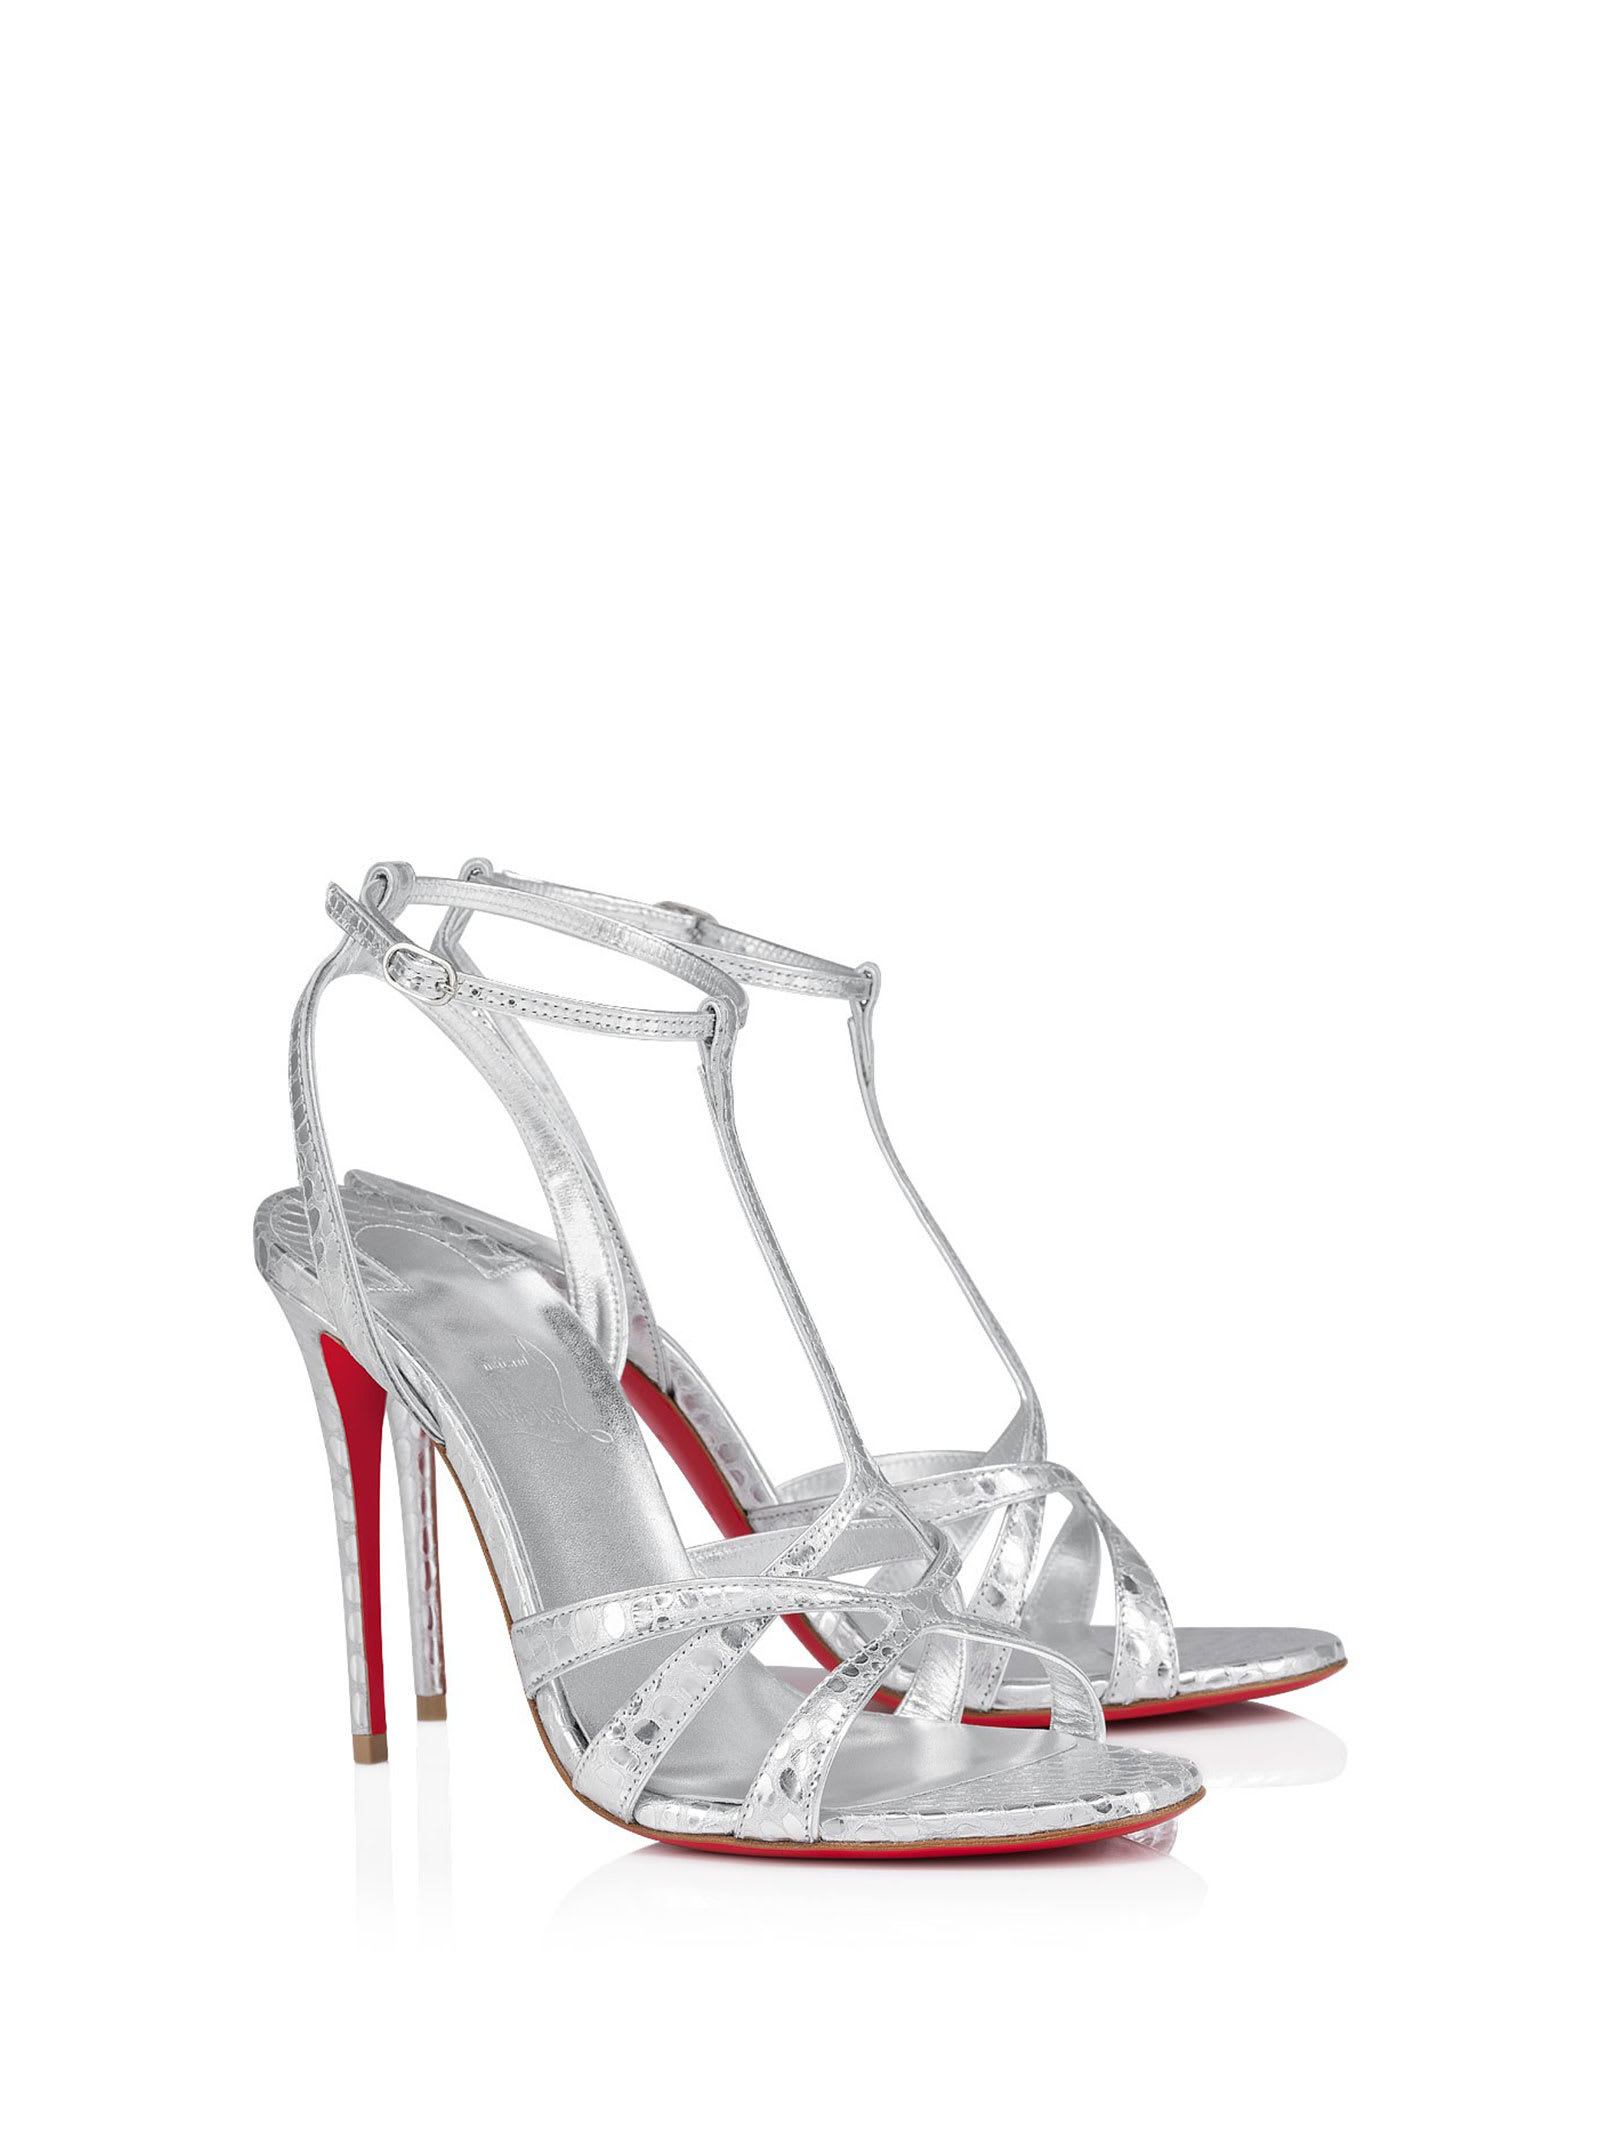 Shop Christian Louboutin Tangueva Strappy Sandals In Iridescent Calf Leathe In Silver